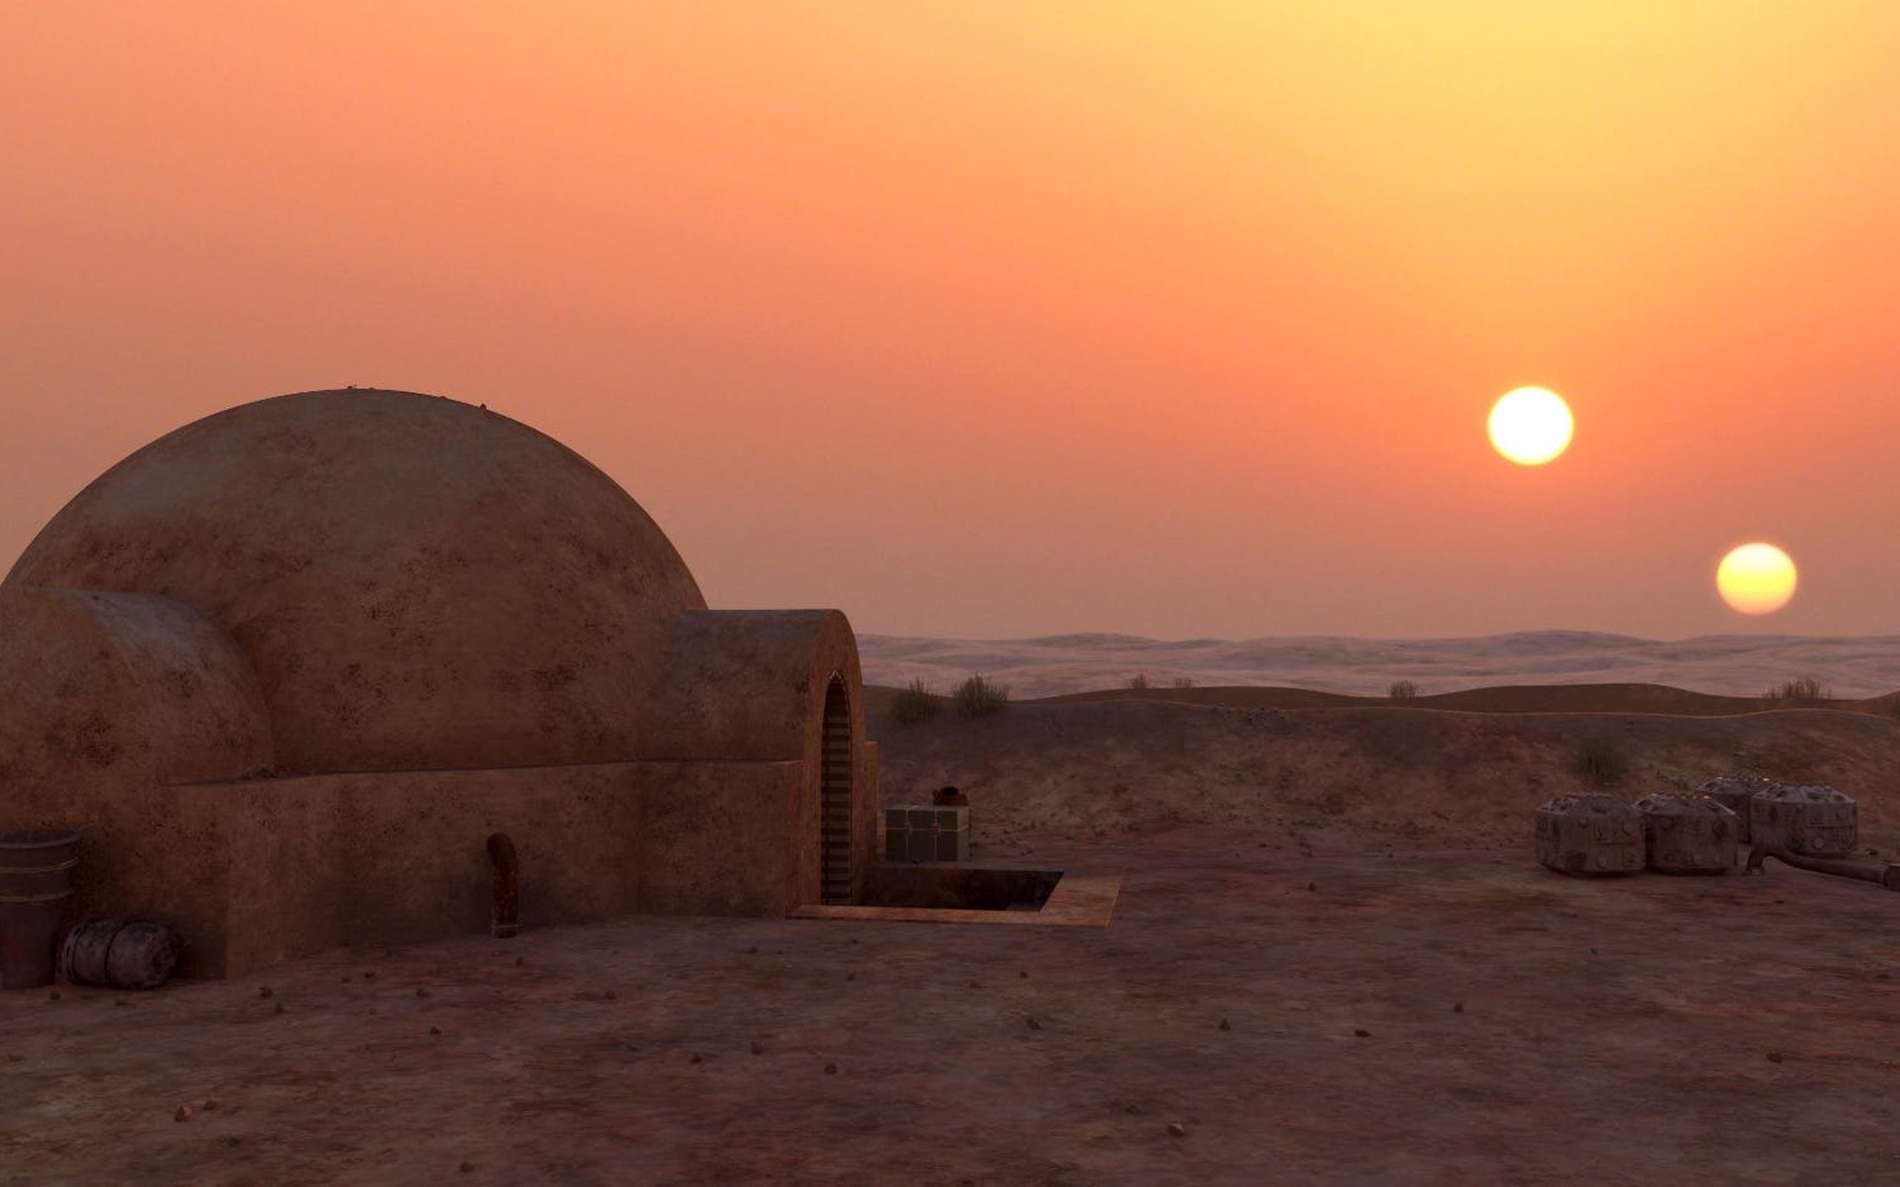 Star Wars Tatooine formation simulated on PC